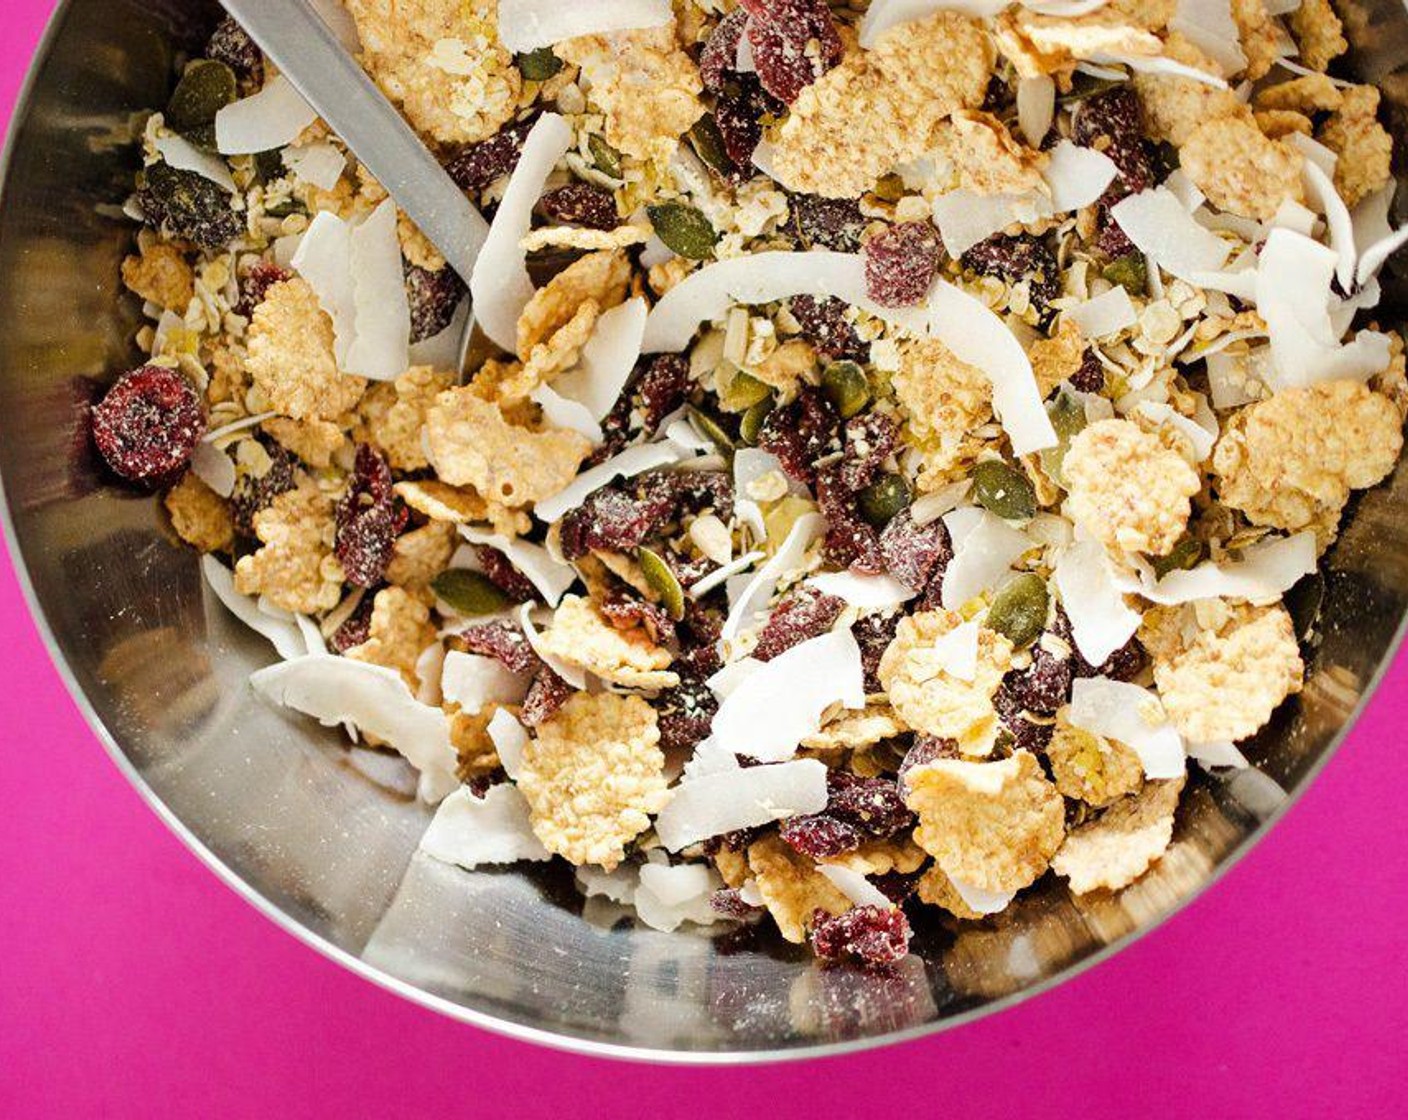 step 1 In a large bowl, combine Honey Bunches of Oats® Honey Roasted (1 cup), Old Fashioned Rolled Oats (3/4 cup), Dried Cranberries (2/3 cup), Unsweetened Coconut Flakes (1/2 cup), Medium Grind Bulgur Wheat (1/3 cup), Sunflower Kernels (1/4 cup) and Pepitas (1/4 cup). Combine Honey (1/2 cup) and Vanilla Extract (1 tsp) in a small sauce pan and bring to a boil over medium-high heat. Boil, stirring frequently for five minutes.